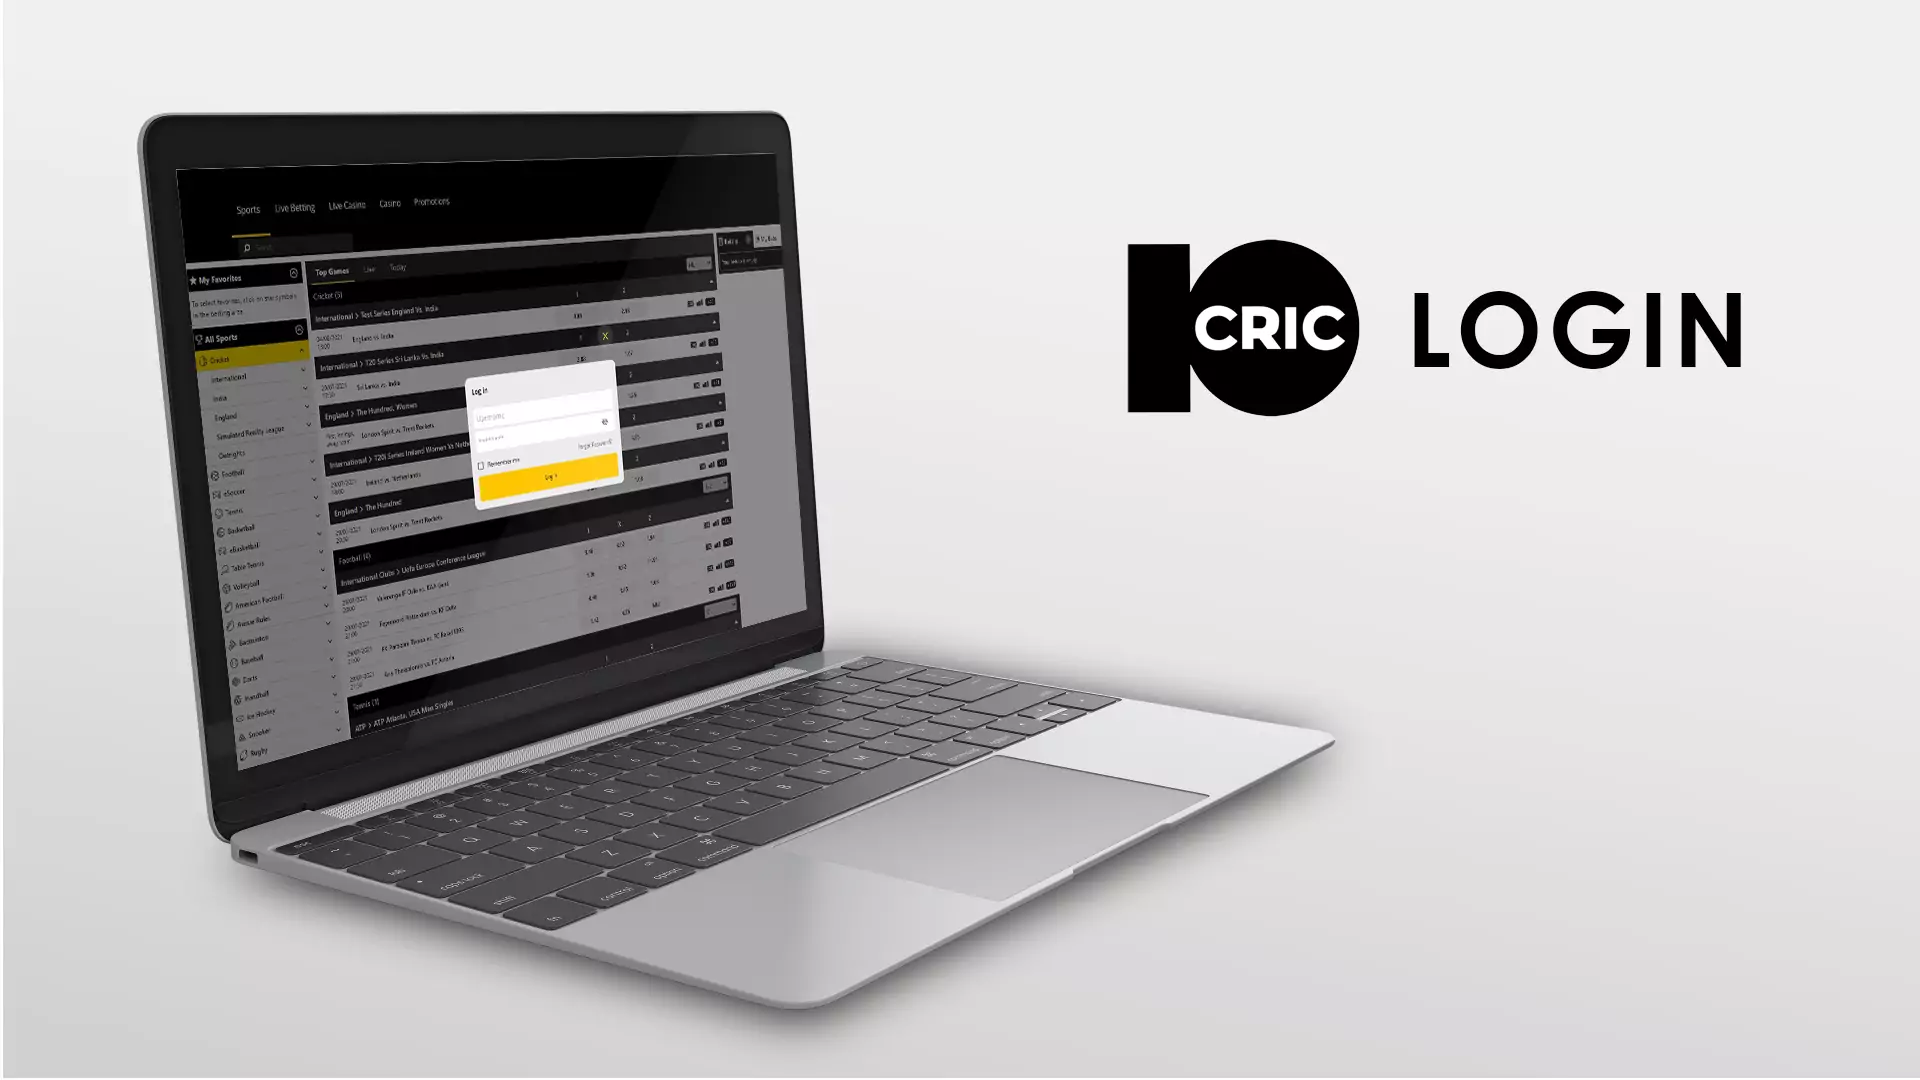 Open the site of 10Cric and click the 'Login' button.